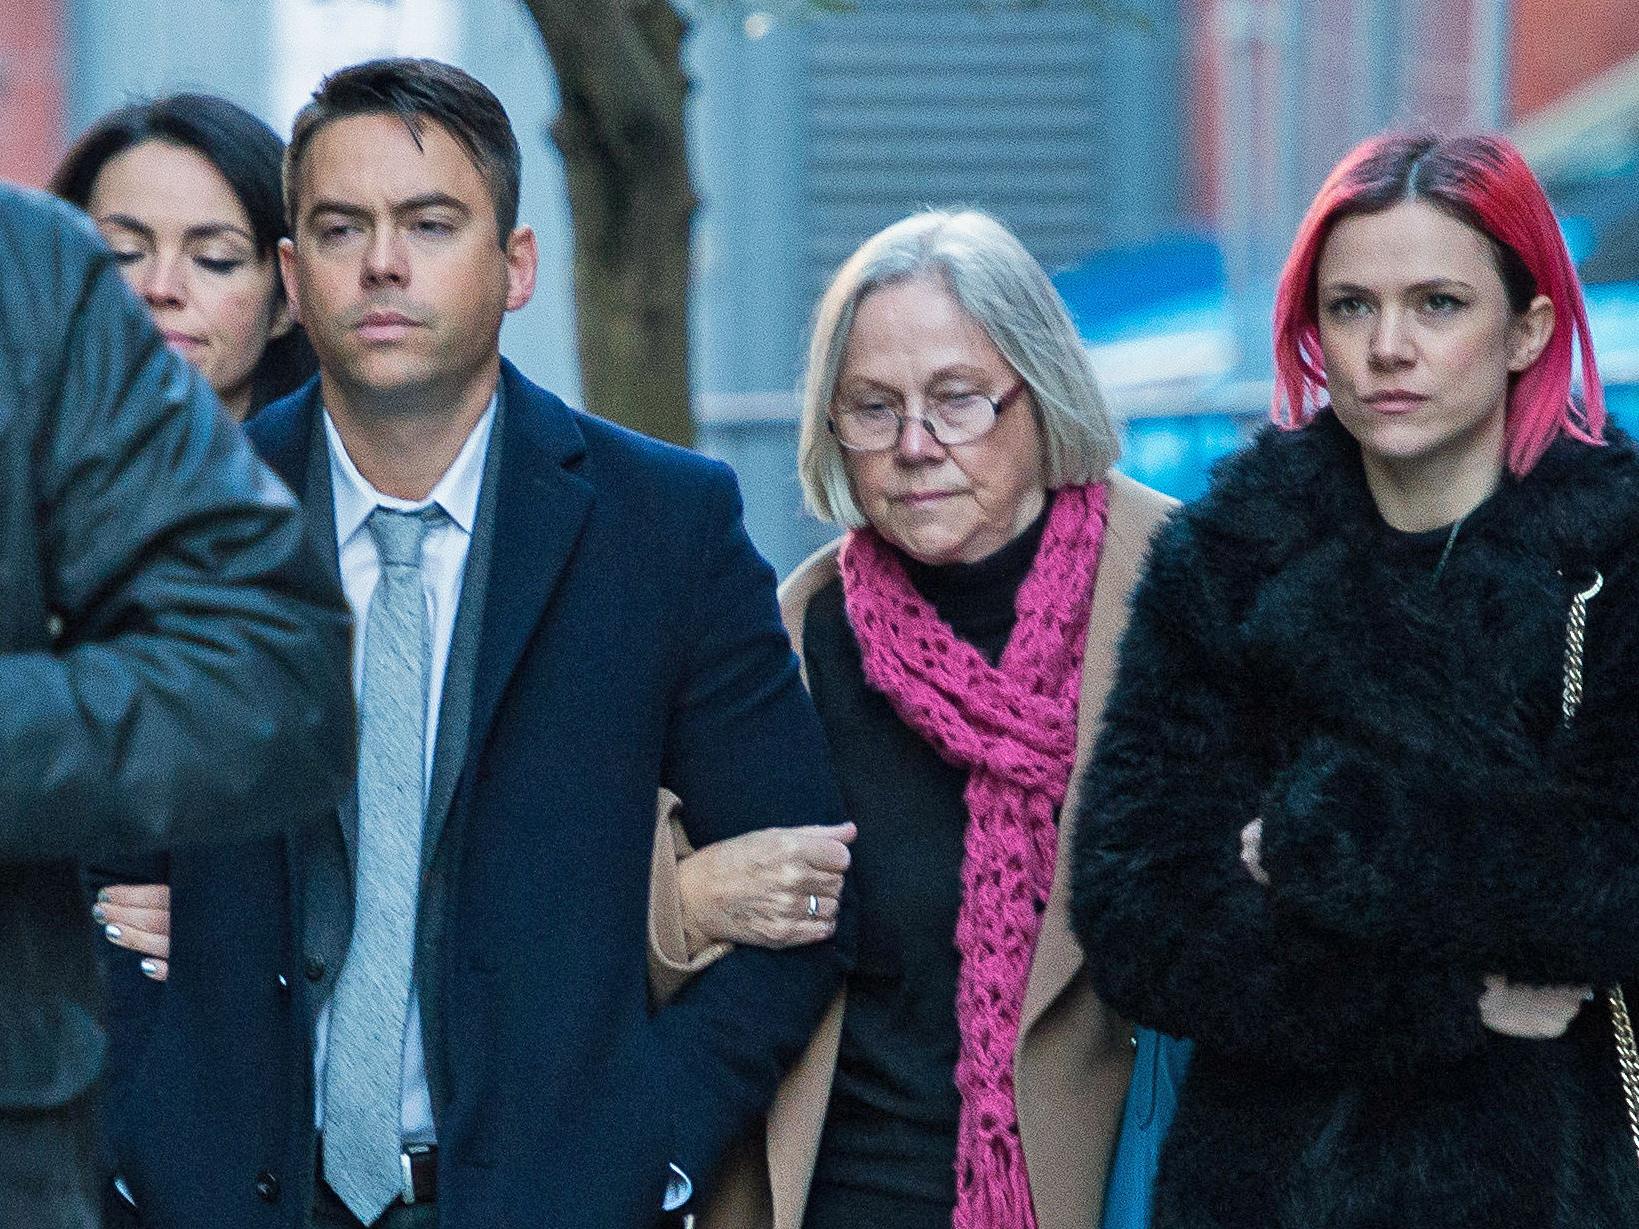 Coronation Street actor Bruno Langley arrives at Manchester Magistrates' Court charged with sexually assaulting two women at a Manchester music venue